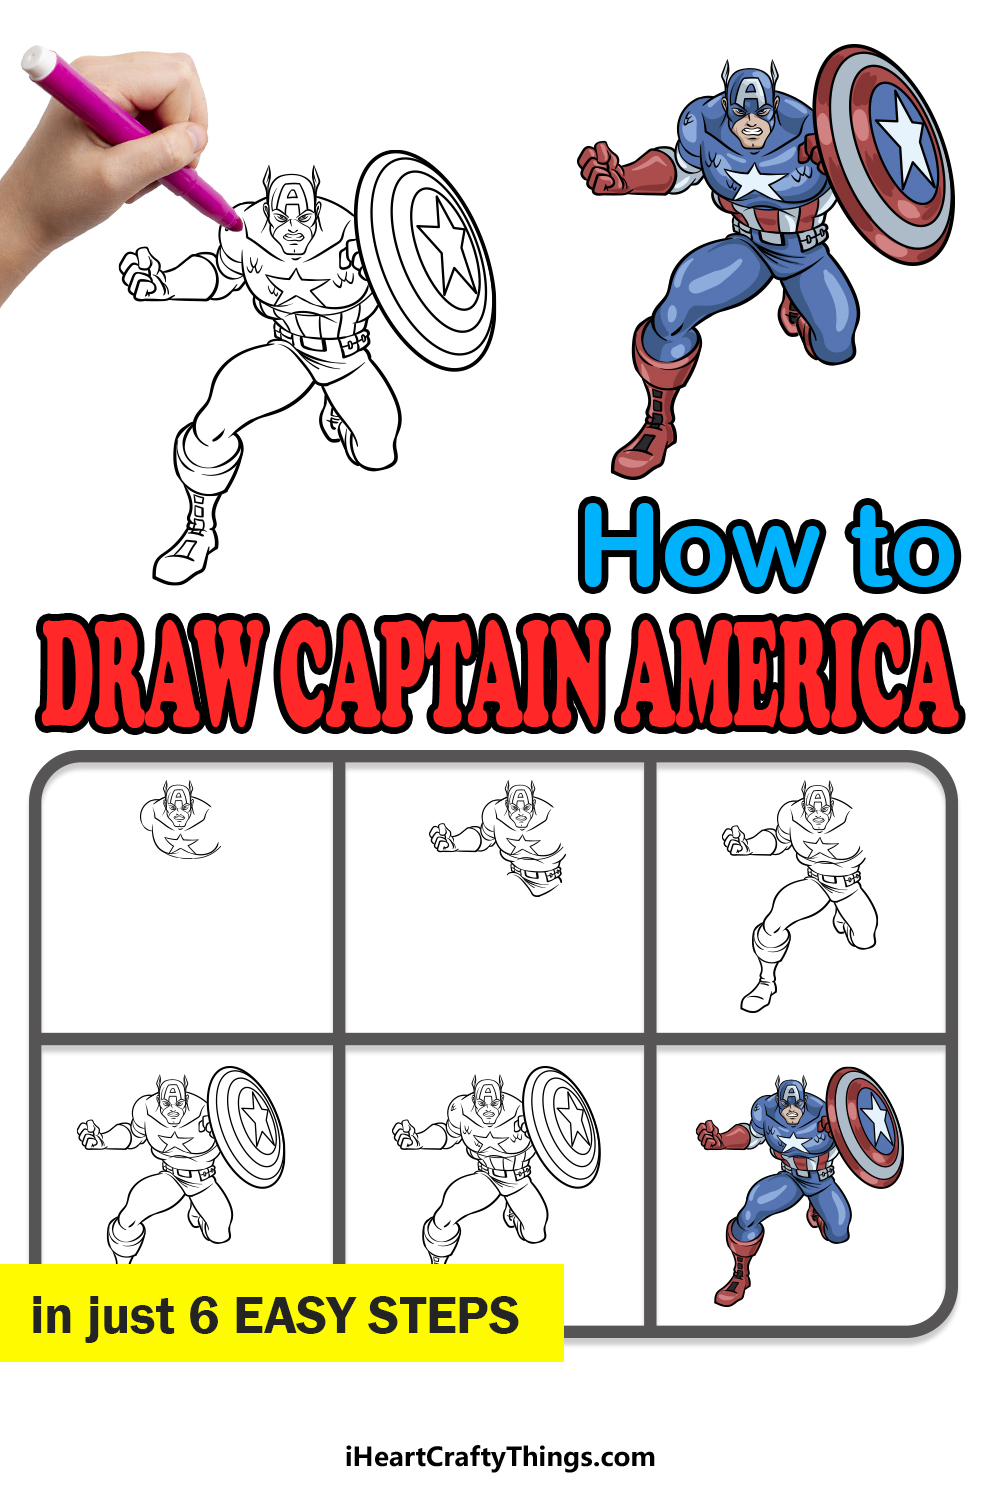 how to draw Captain America in 6 easy steps